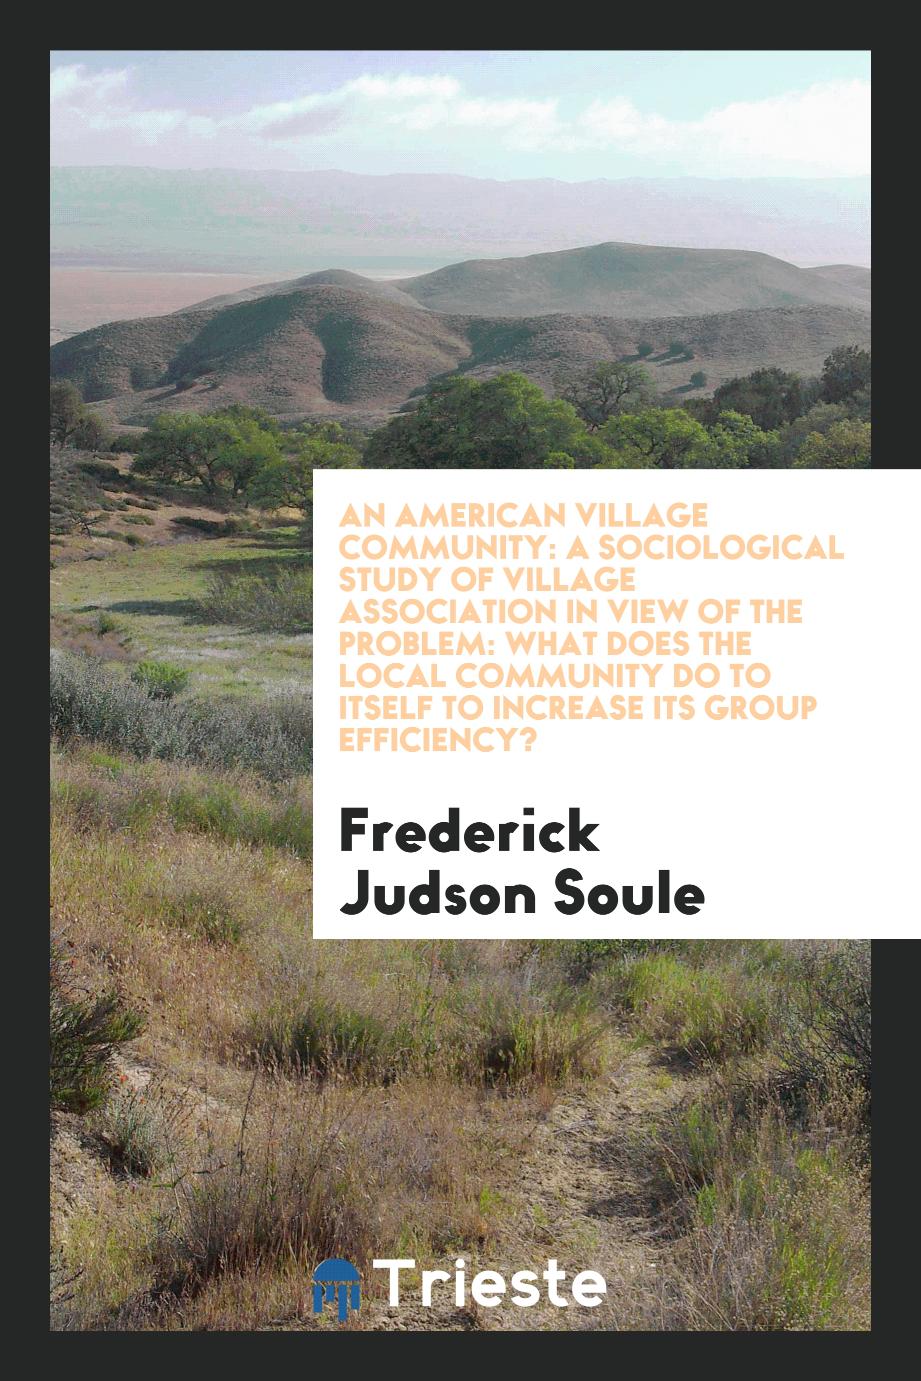 An American Village Community: A Sociological Study of Village Association in view of the problem: what does the local community do to itself to increase its group efficiency?